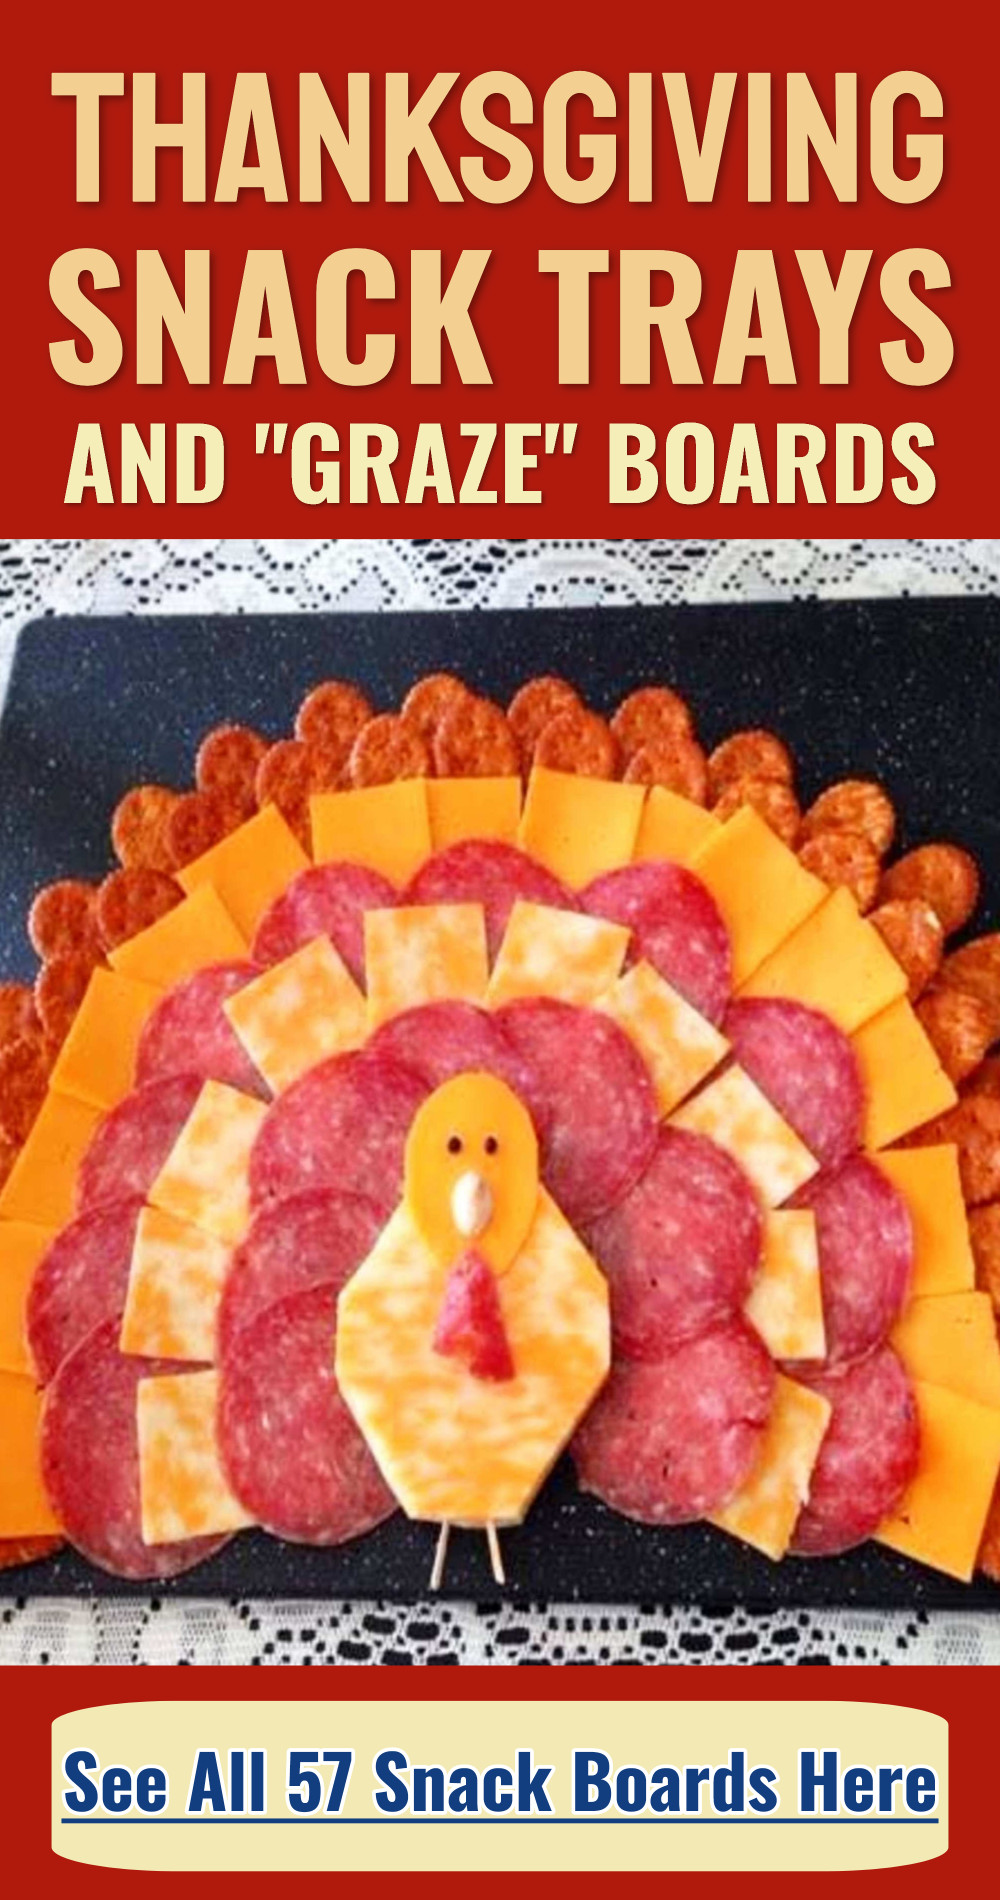 Party Platter Ideas - Thanksgiving Snack Boards, Appetizer Platters and Finger Food Trays